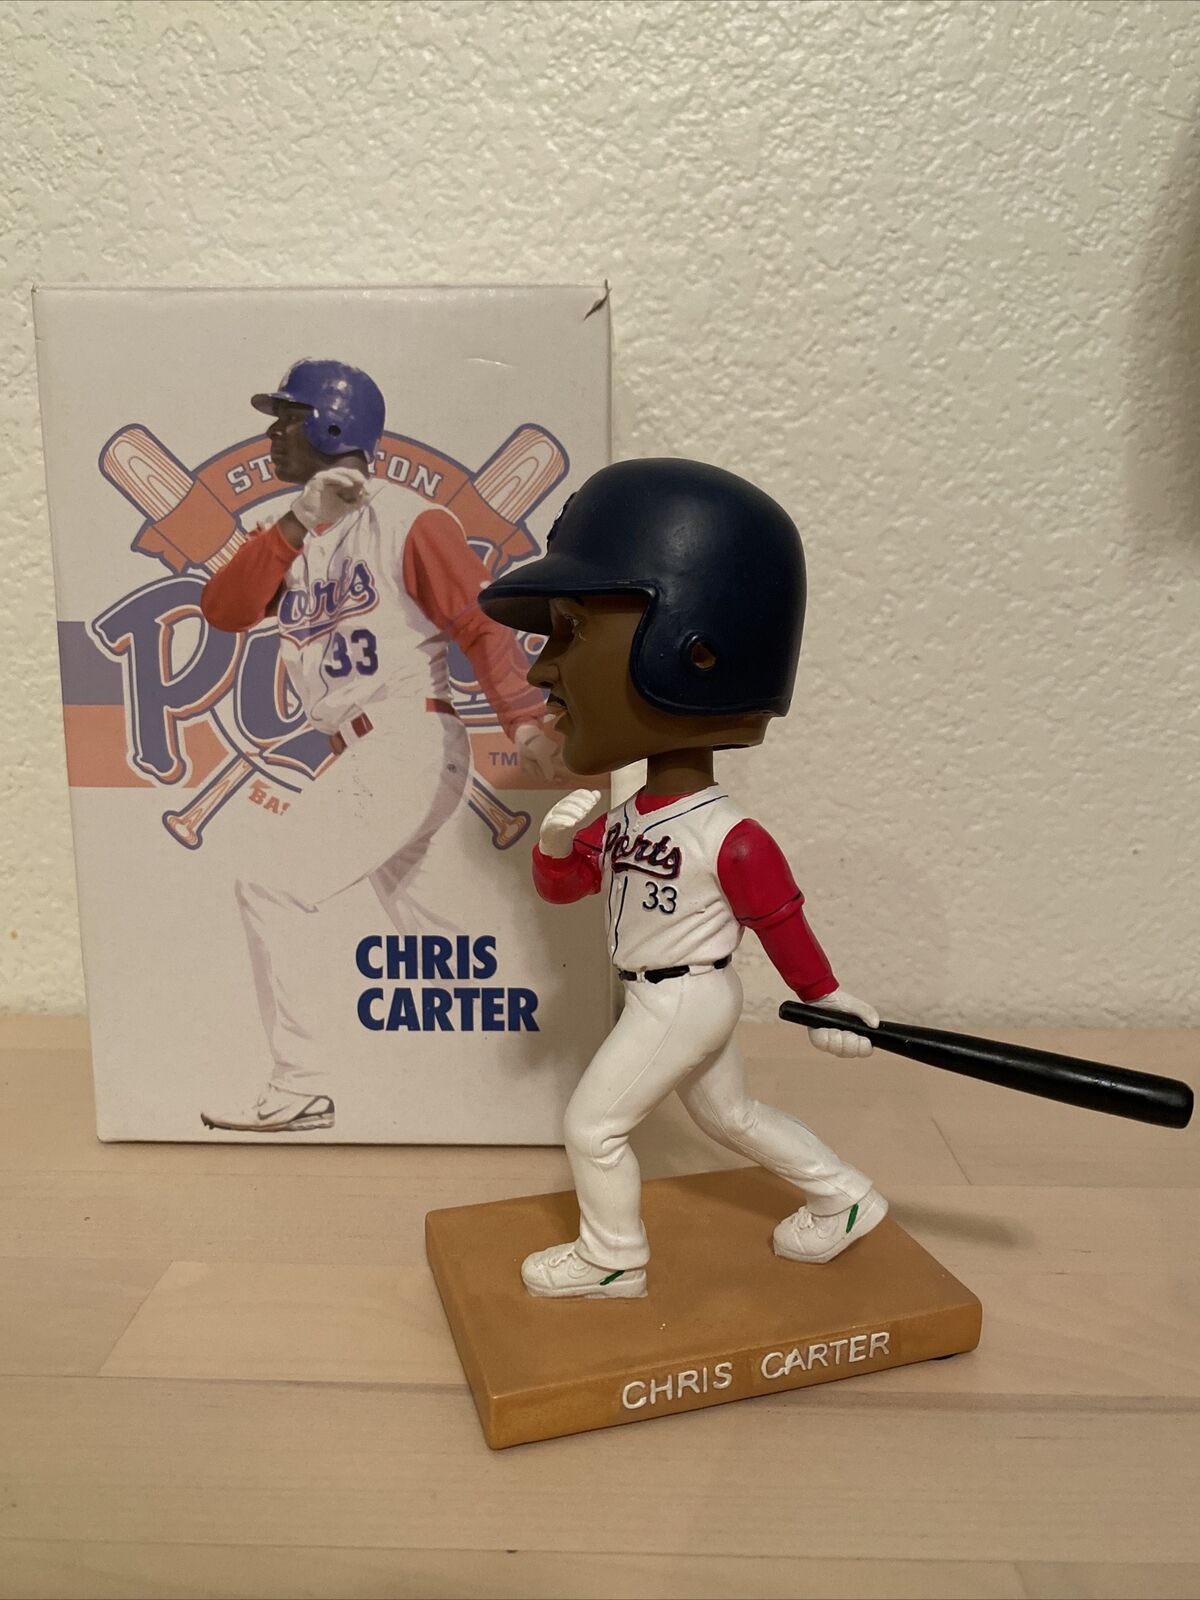 CHRIS CARTER STOCKTON PORTS BOBBLE HEAD BREWERS ASTROS YANKEES 2008 CHAMPIONS